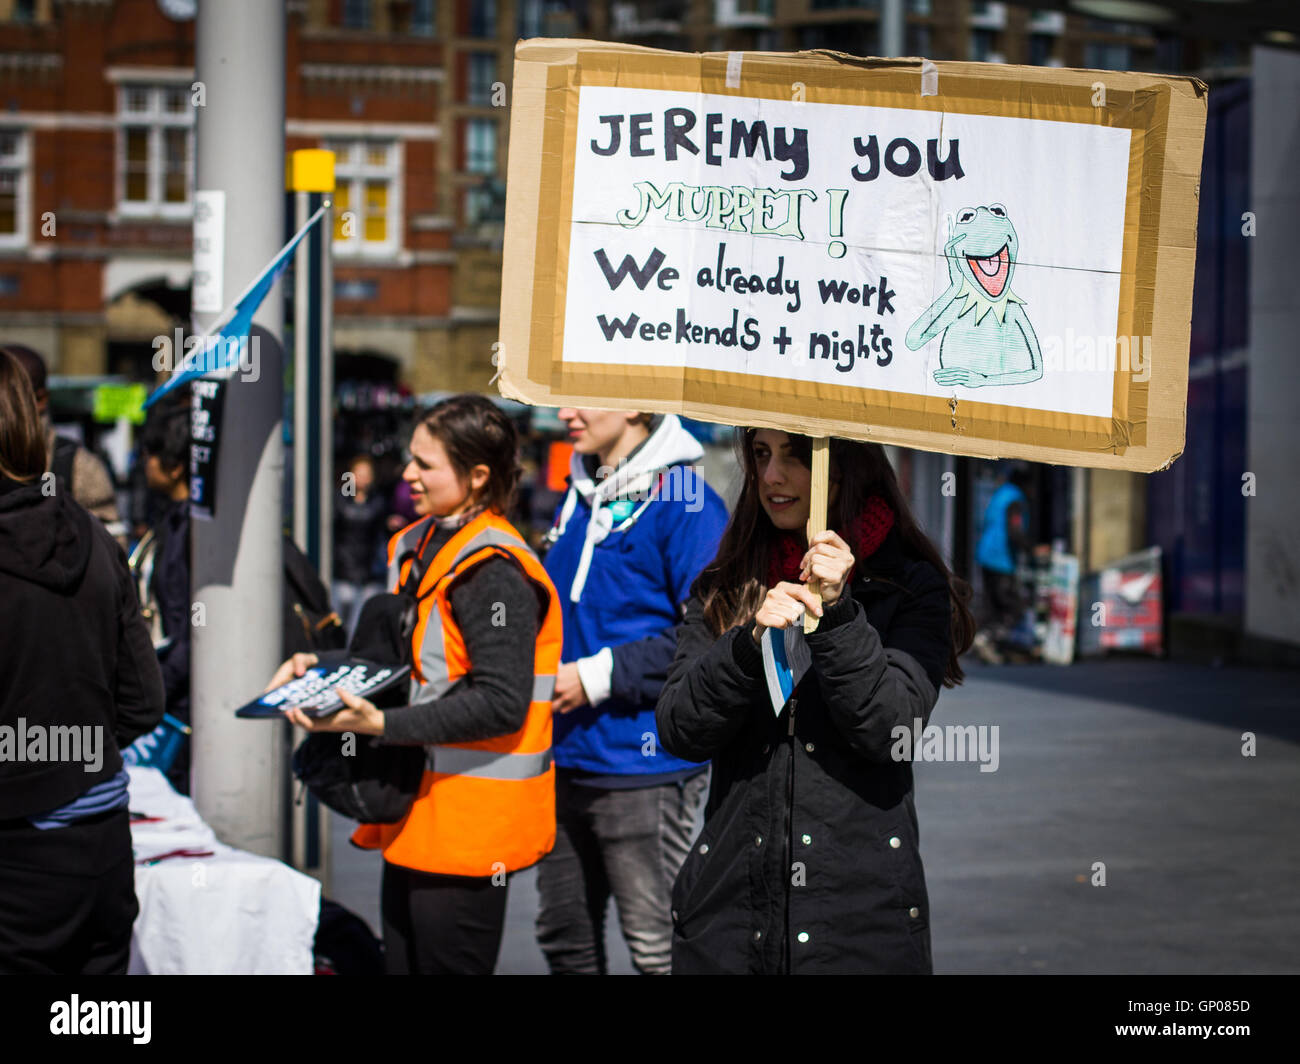 Junior doctors go on strike in Woolwich, South East London Stock Photo